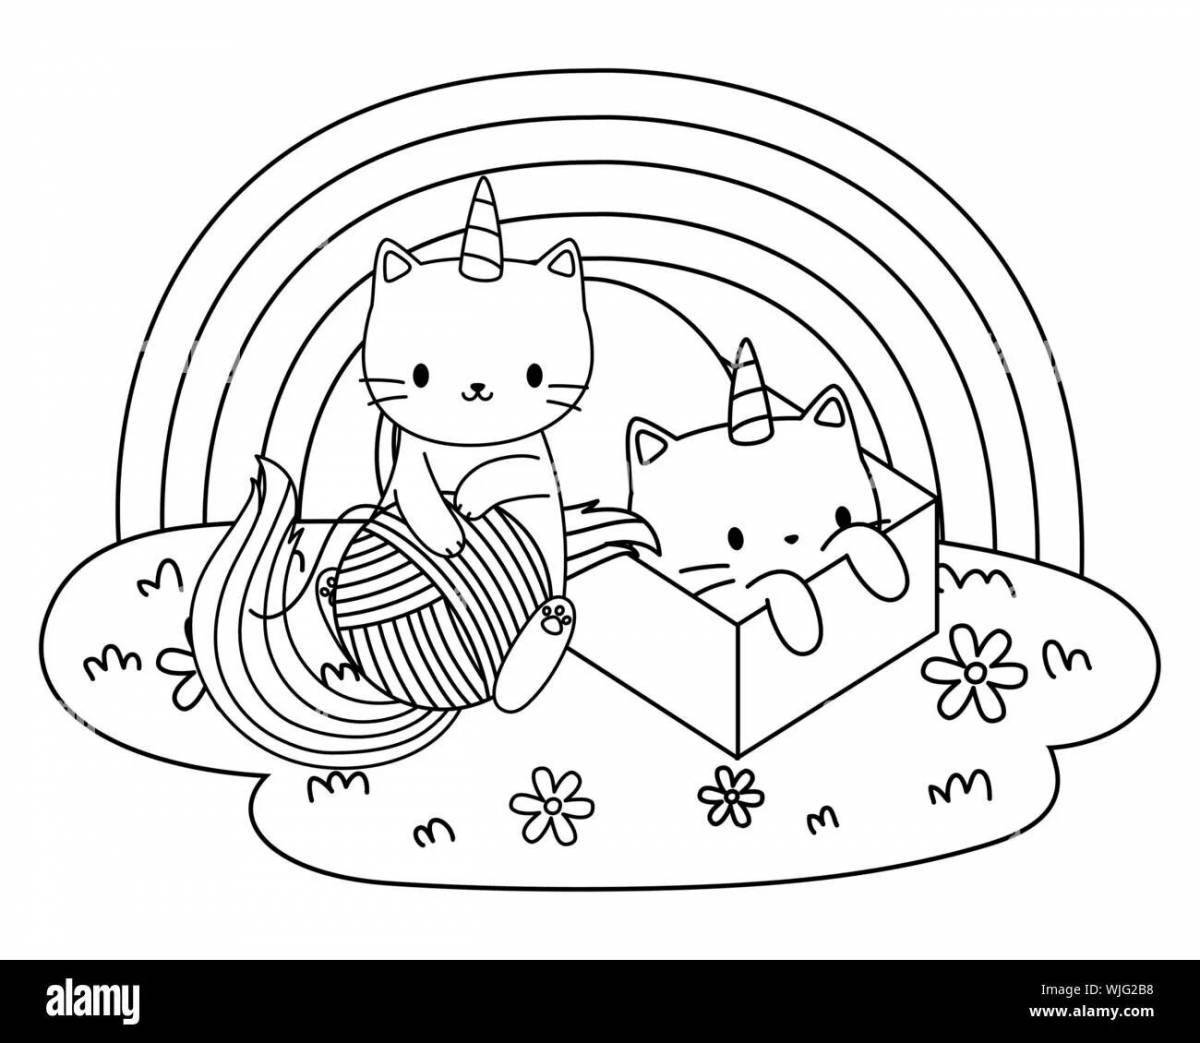 Colorful rainbow kitten coloring page